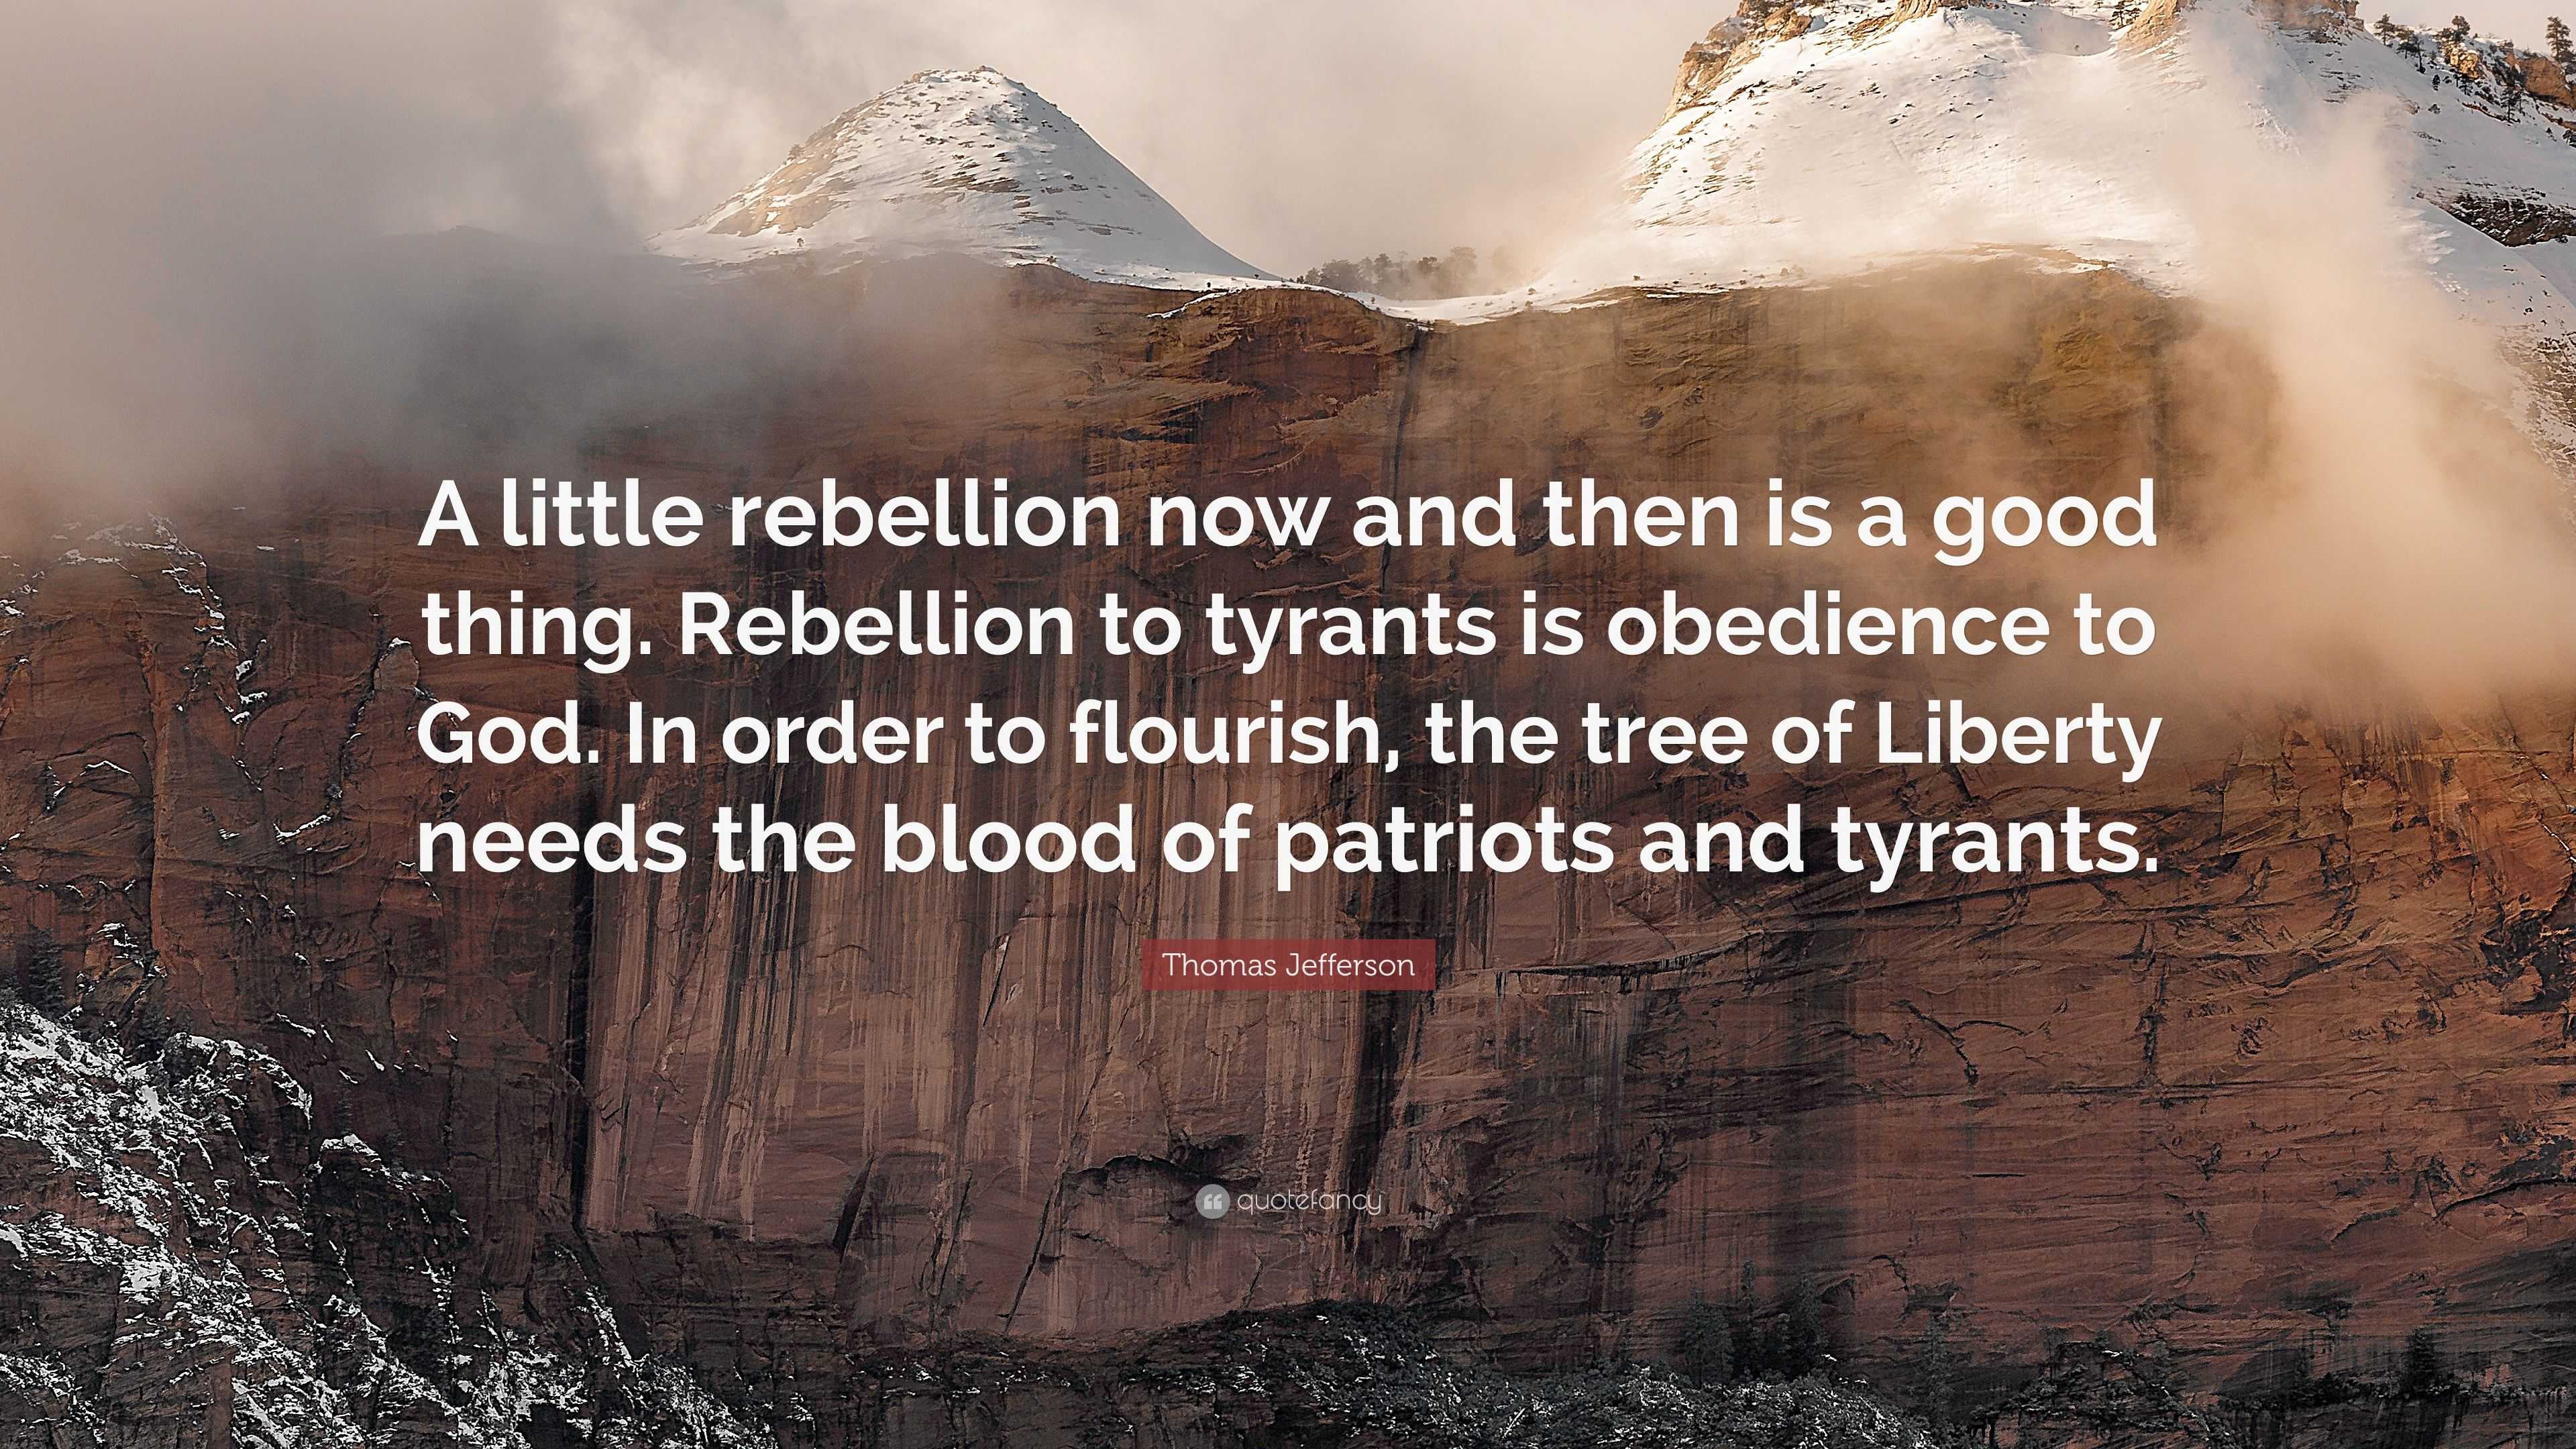 Thomas Jefferson Quote “A little rebellion now and then is a good